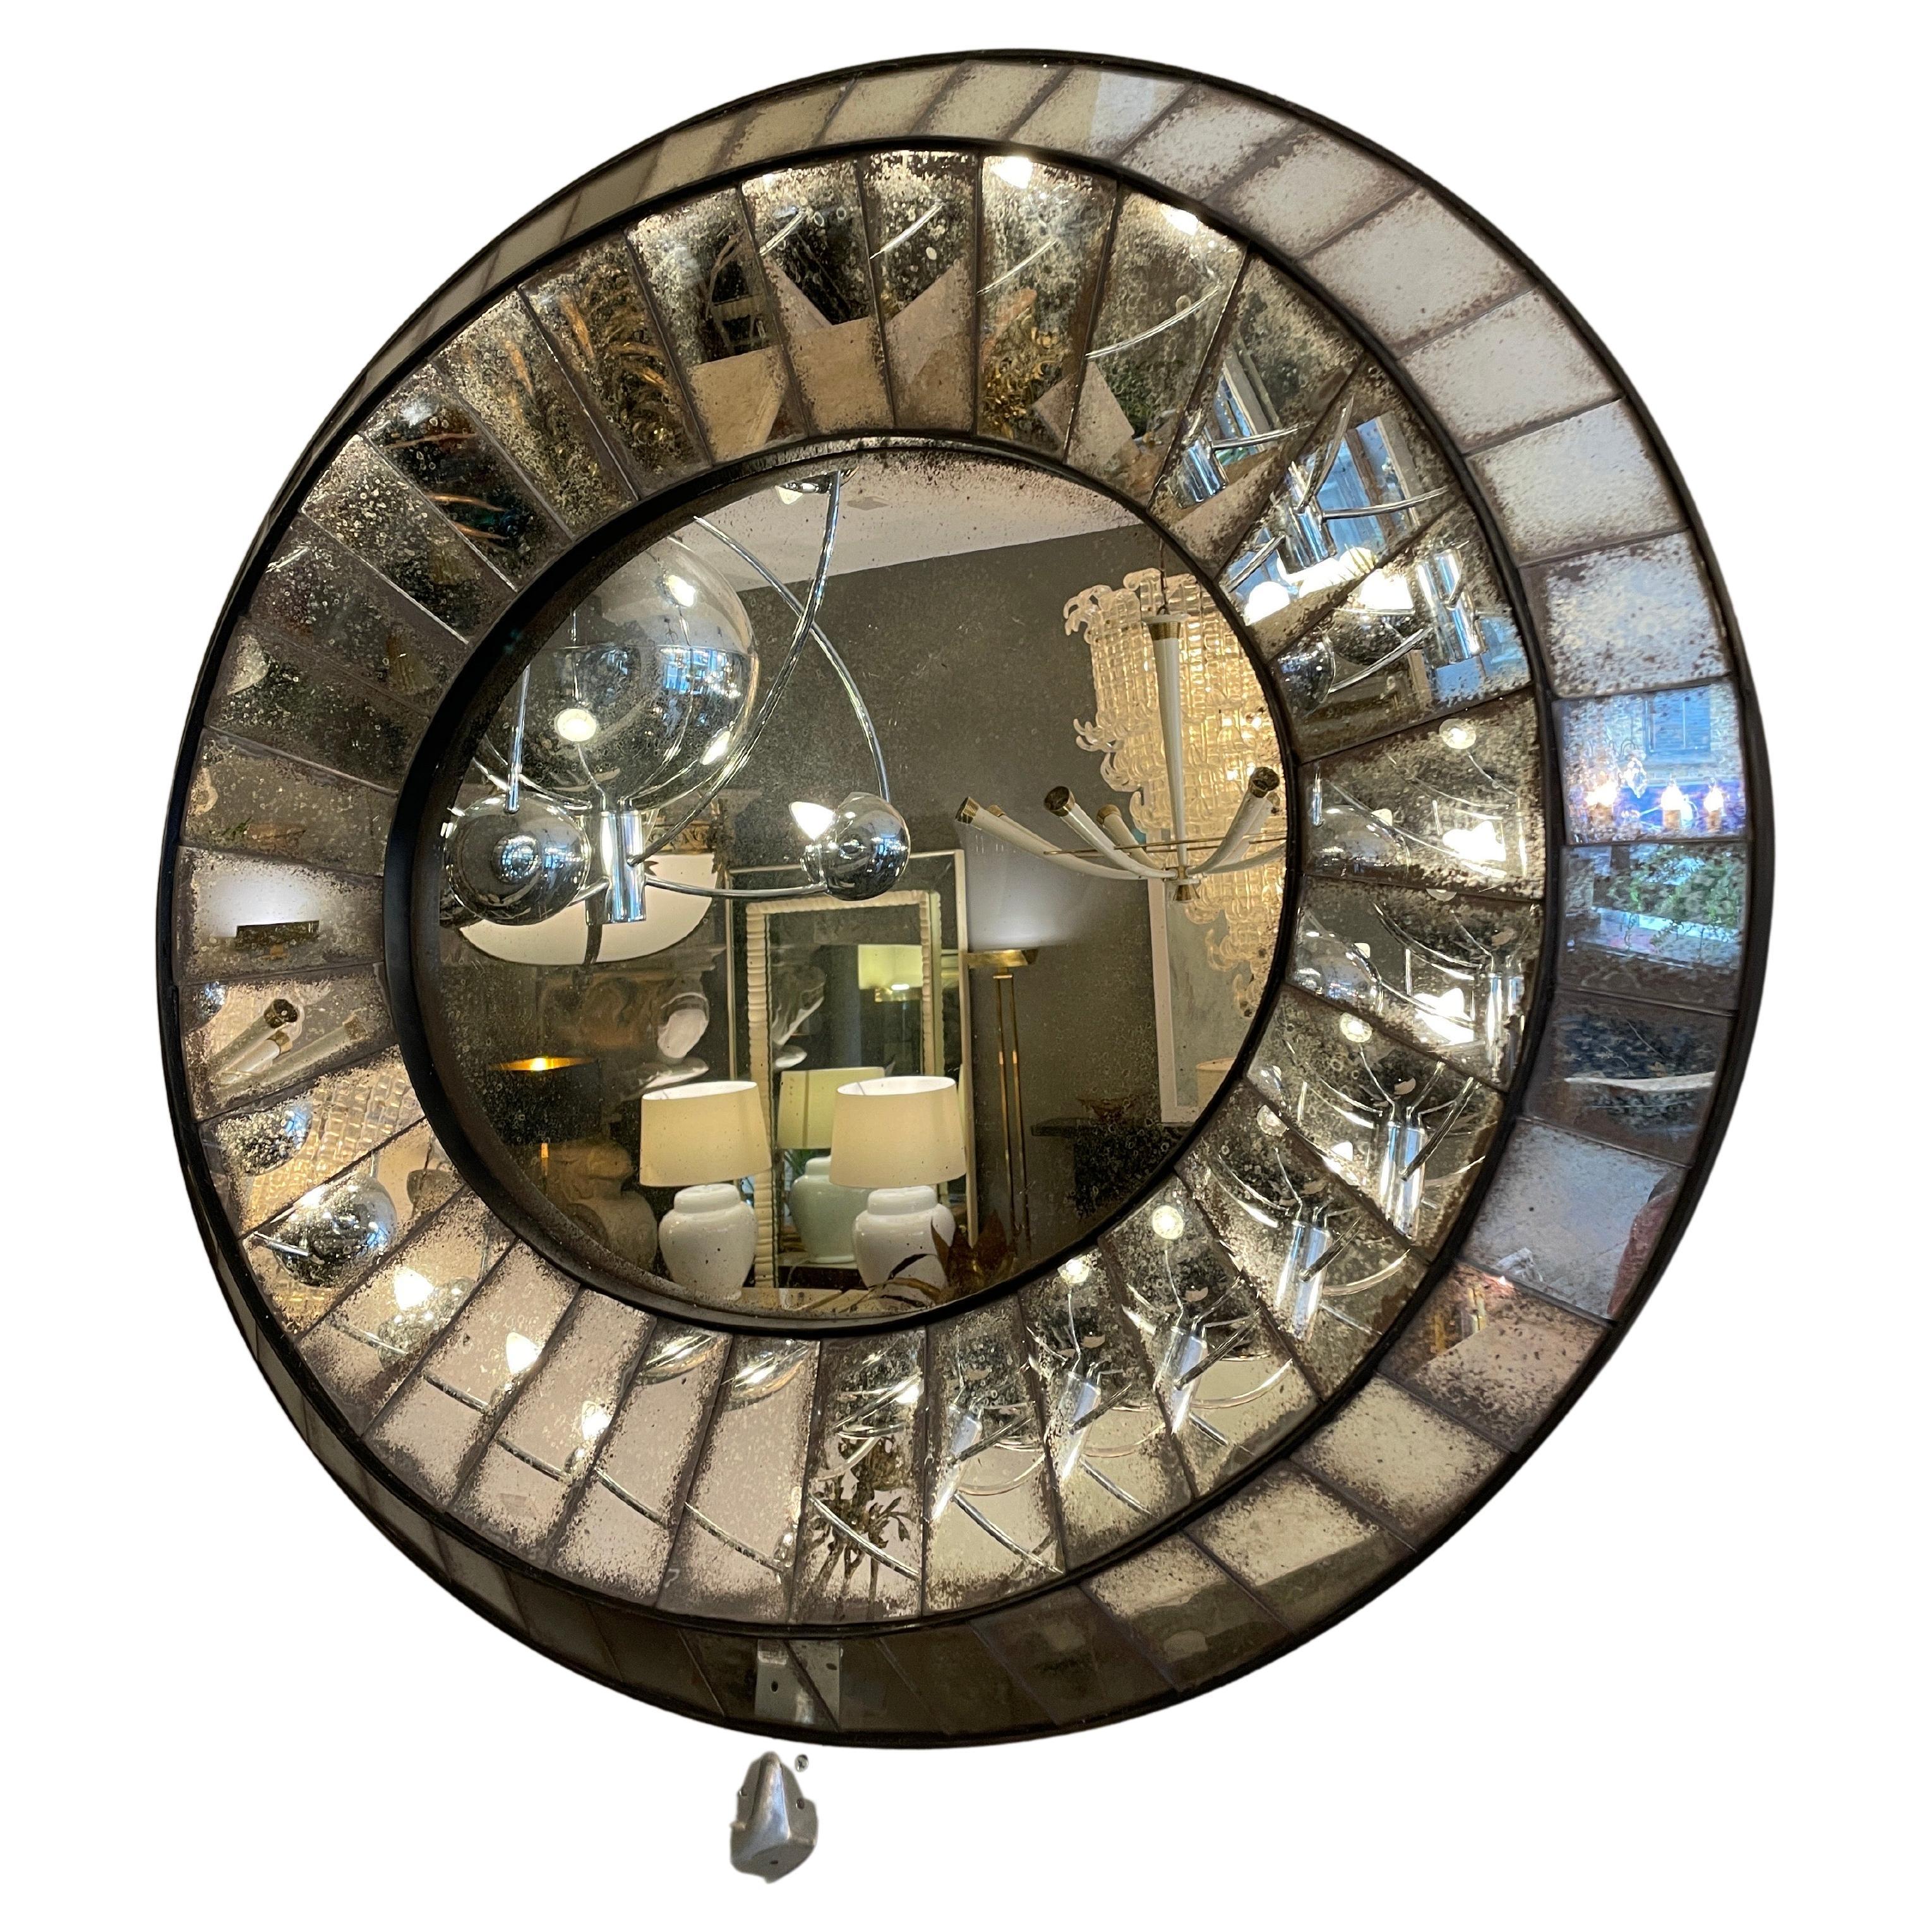 A large distressed oval shaped mirror with cushion panelled border. The faceted glass border heavily distressed with lighter distressed inner. Can be hung both portrait and landscape as seen in images. All glass within a black burnished steel frame.